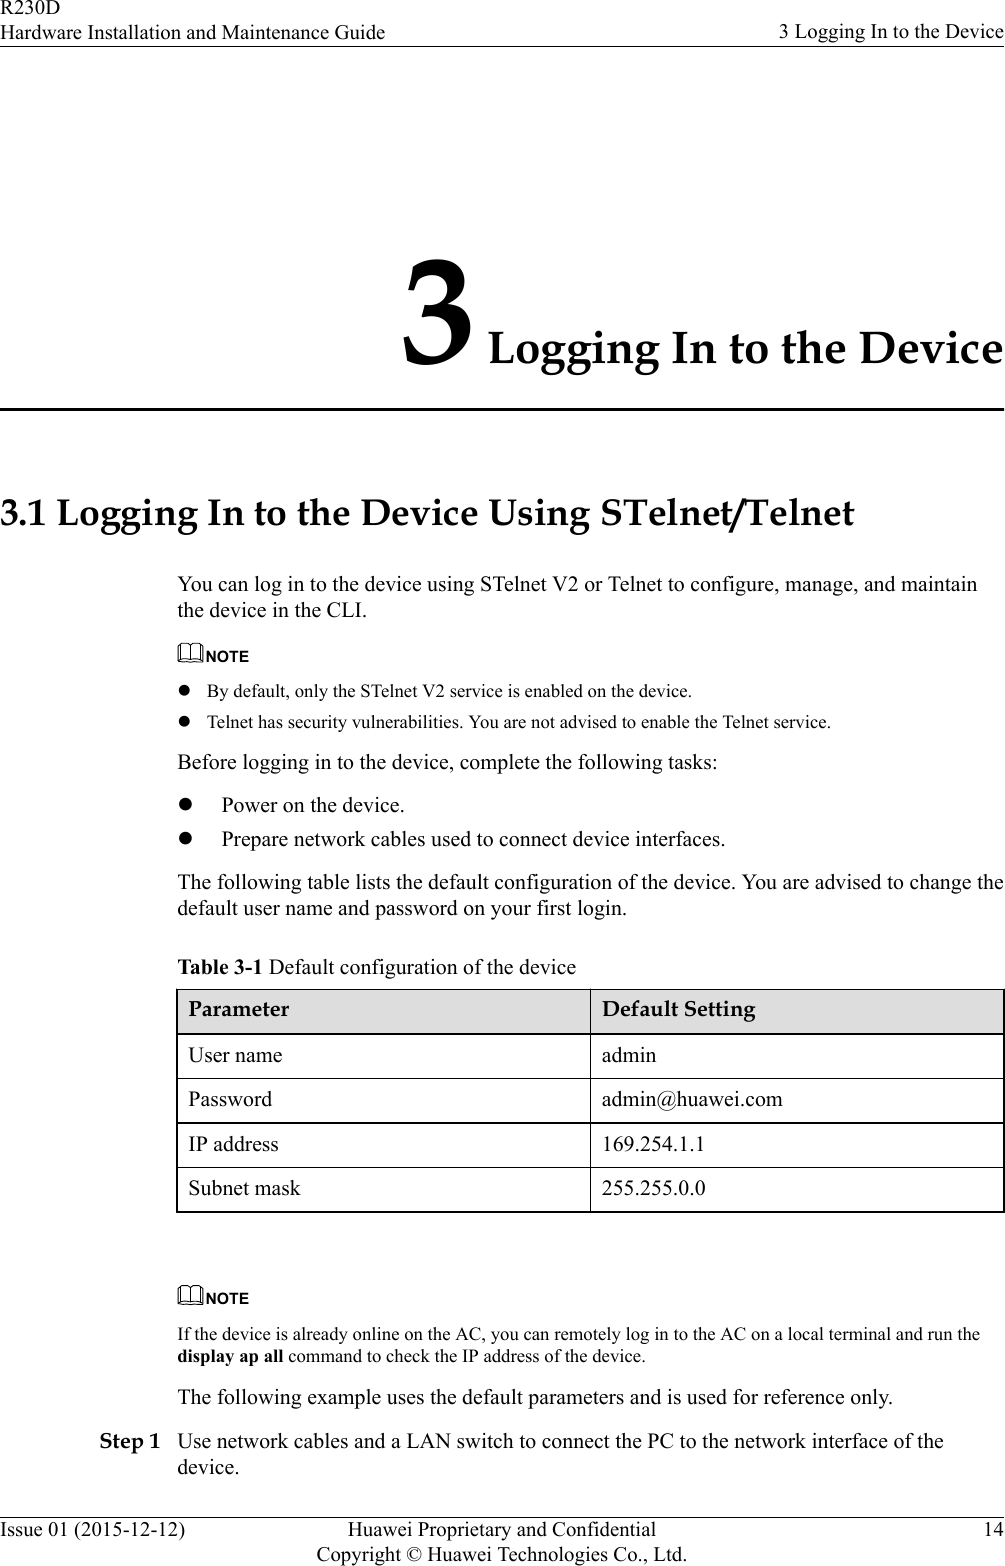 3 Logging In to the Device3.1 Logging In to the Device Using STelnet/TelnetYou can log in to the device using STelnet V2 or Telnet to configure, manage, and maintainthe device in the CLI.NOTElBy default, only the STelnet V2 service is enabled on the device.lTelnet has security vulnerabilities. You are not advised to enable the Telnet service.Before logging in to the device, complete the following tasks:lPower on the device.lPrepare network cables used to connect device interfaces.The following table lists the default configuration of the device. You are advised to change thedefault user name and password on your first login.Table 3-1 Default configuration of the deviceParameter Default SettingUser name adminPassword admin@huawei.comIP address 169.254.1.1Subnet mask 255.255.0.0 NOTEIf the device is already online on the AC, you can remotely log in to the AC on a local terminal and run thedisplay ap all command to check the IP address of the device.The following example uses the default parameters and is used for reference only.Step 1 Use network cables and a LAN switch to connect the PC to the network interface of thedevice.R230DHardware Installation and Maintenance Guide 3 Logging In to the DeviceIssue 01 (2015-12-12) Huawei Proprietary and ConfidentialCopyright © Huawei Technologies Co., Ltd.14